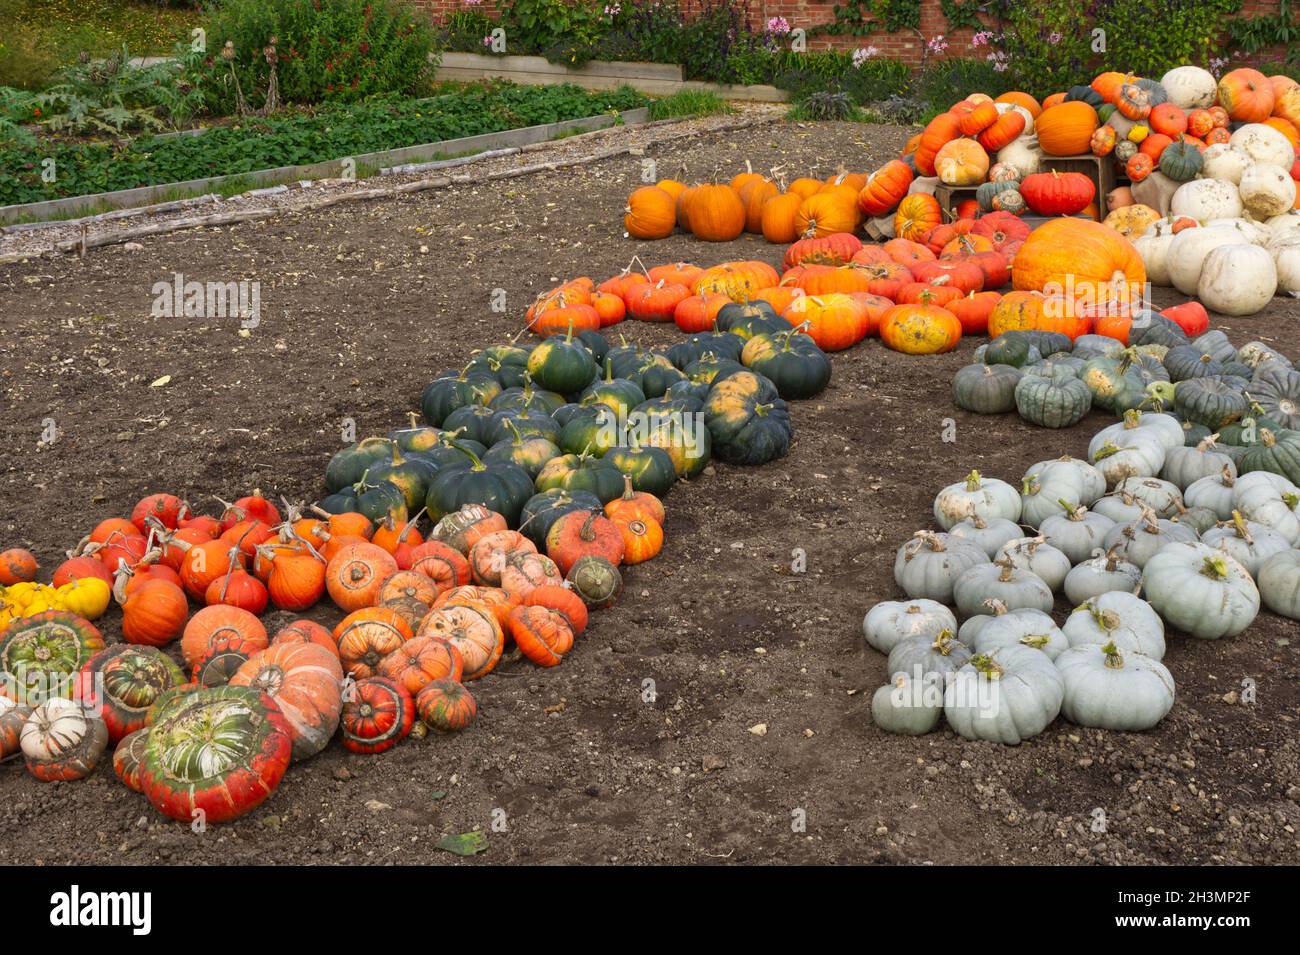 Colourful mixture of varieties of Pumpkins on ground Stock Photo